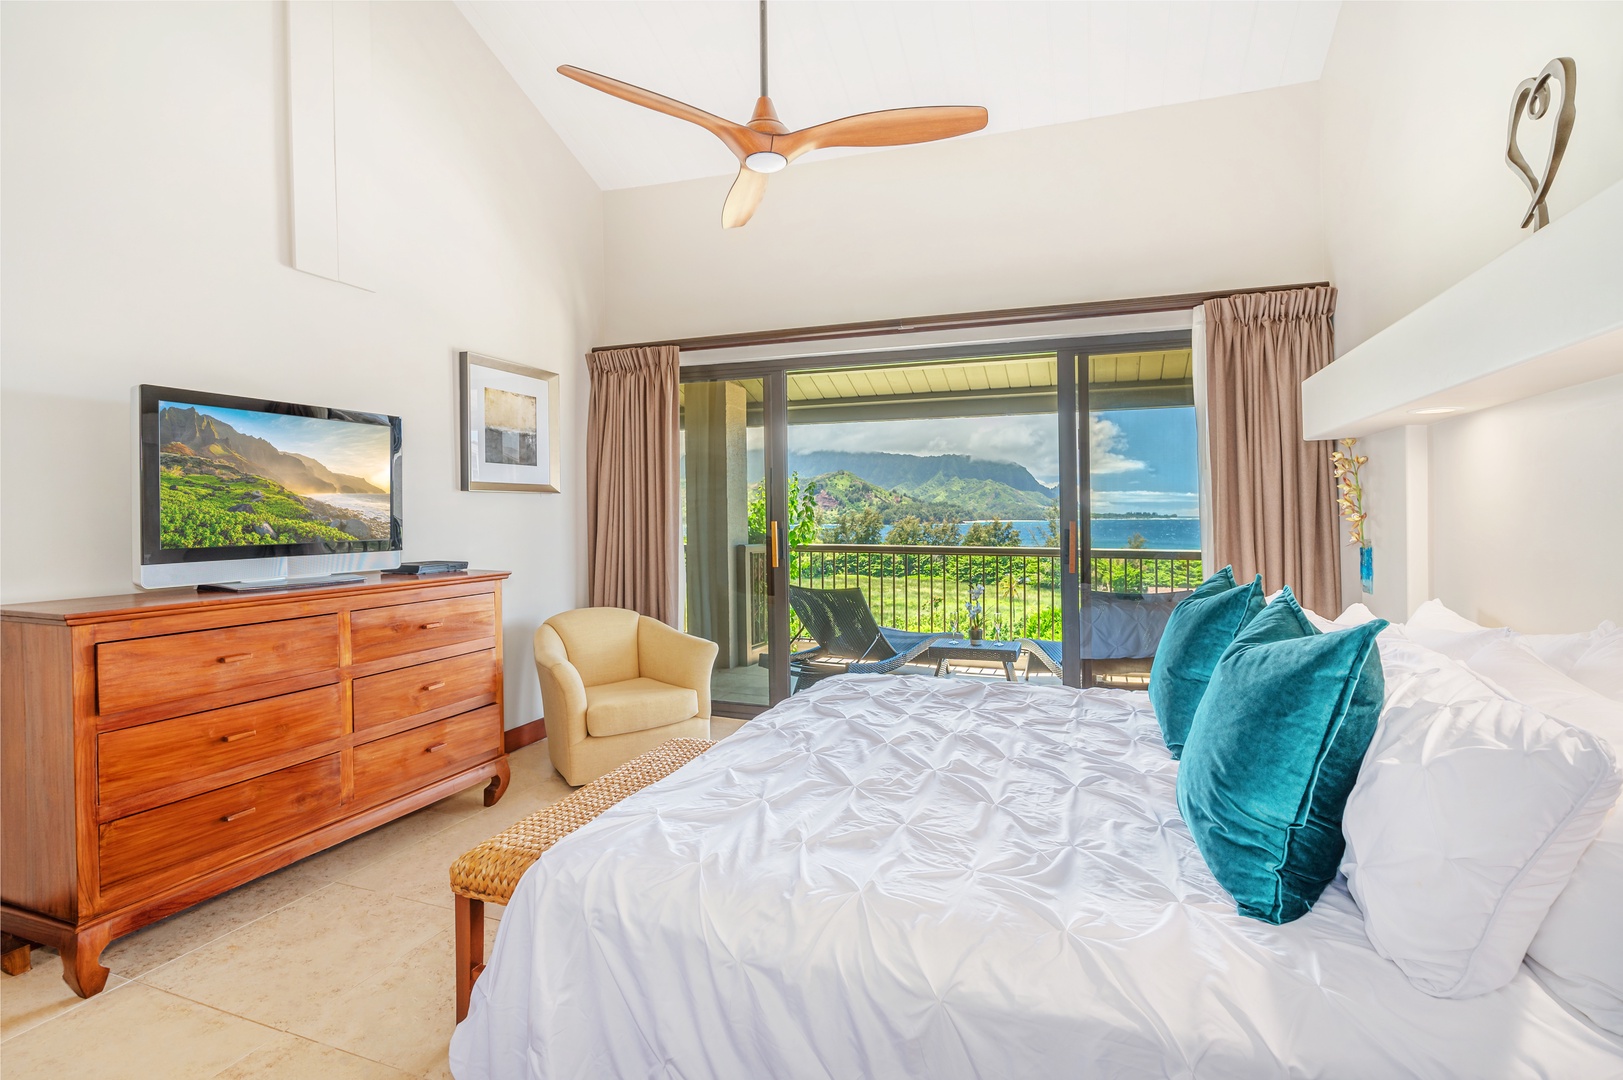 Princeville Vacation Rentals, Hanalei Bay Resort 7307/08 - Primary bedroom with flat screen TV and DVD player